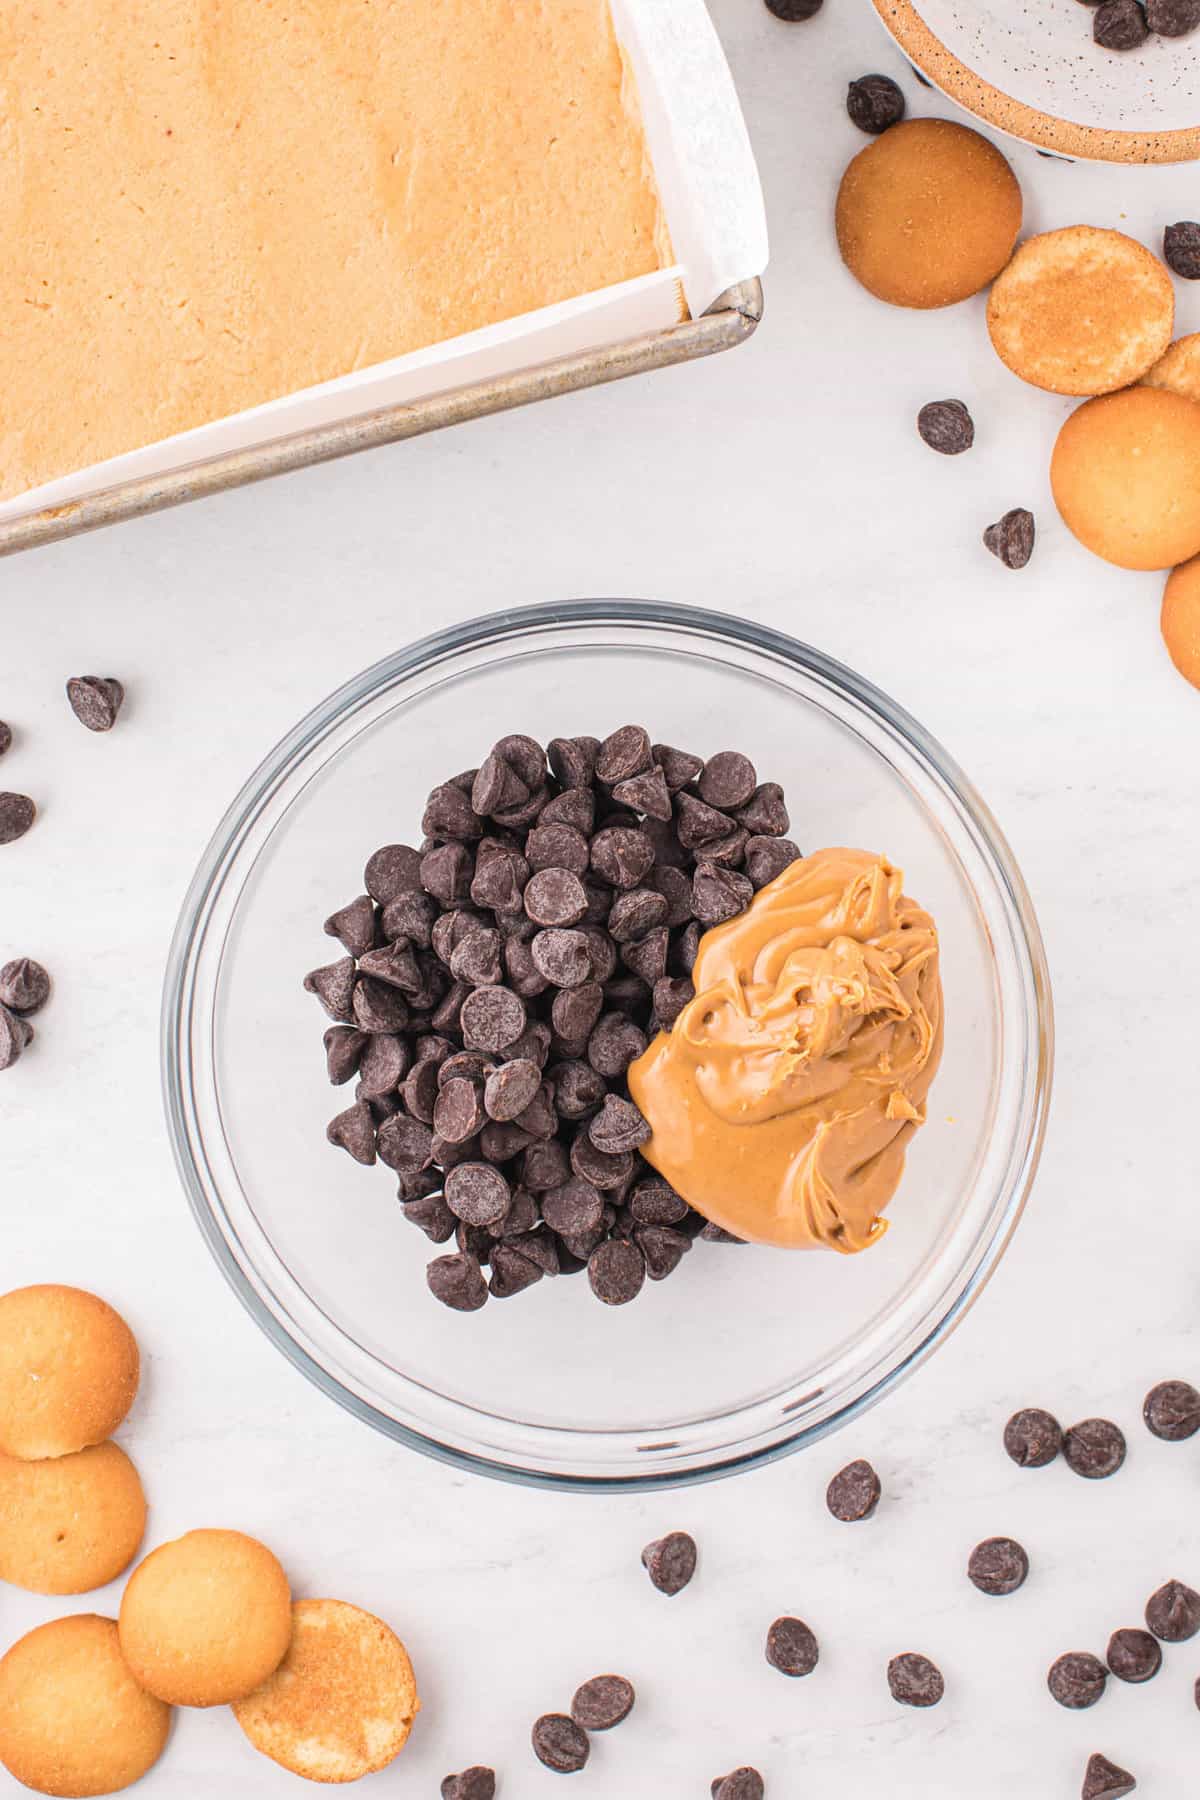 Chocolate Chips and Peanut Butter in Mixing Bowl for Chocolate Peanut Butter Bars Recipe